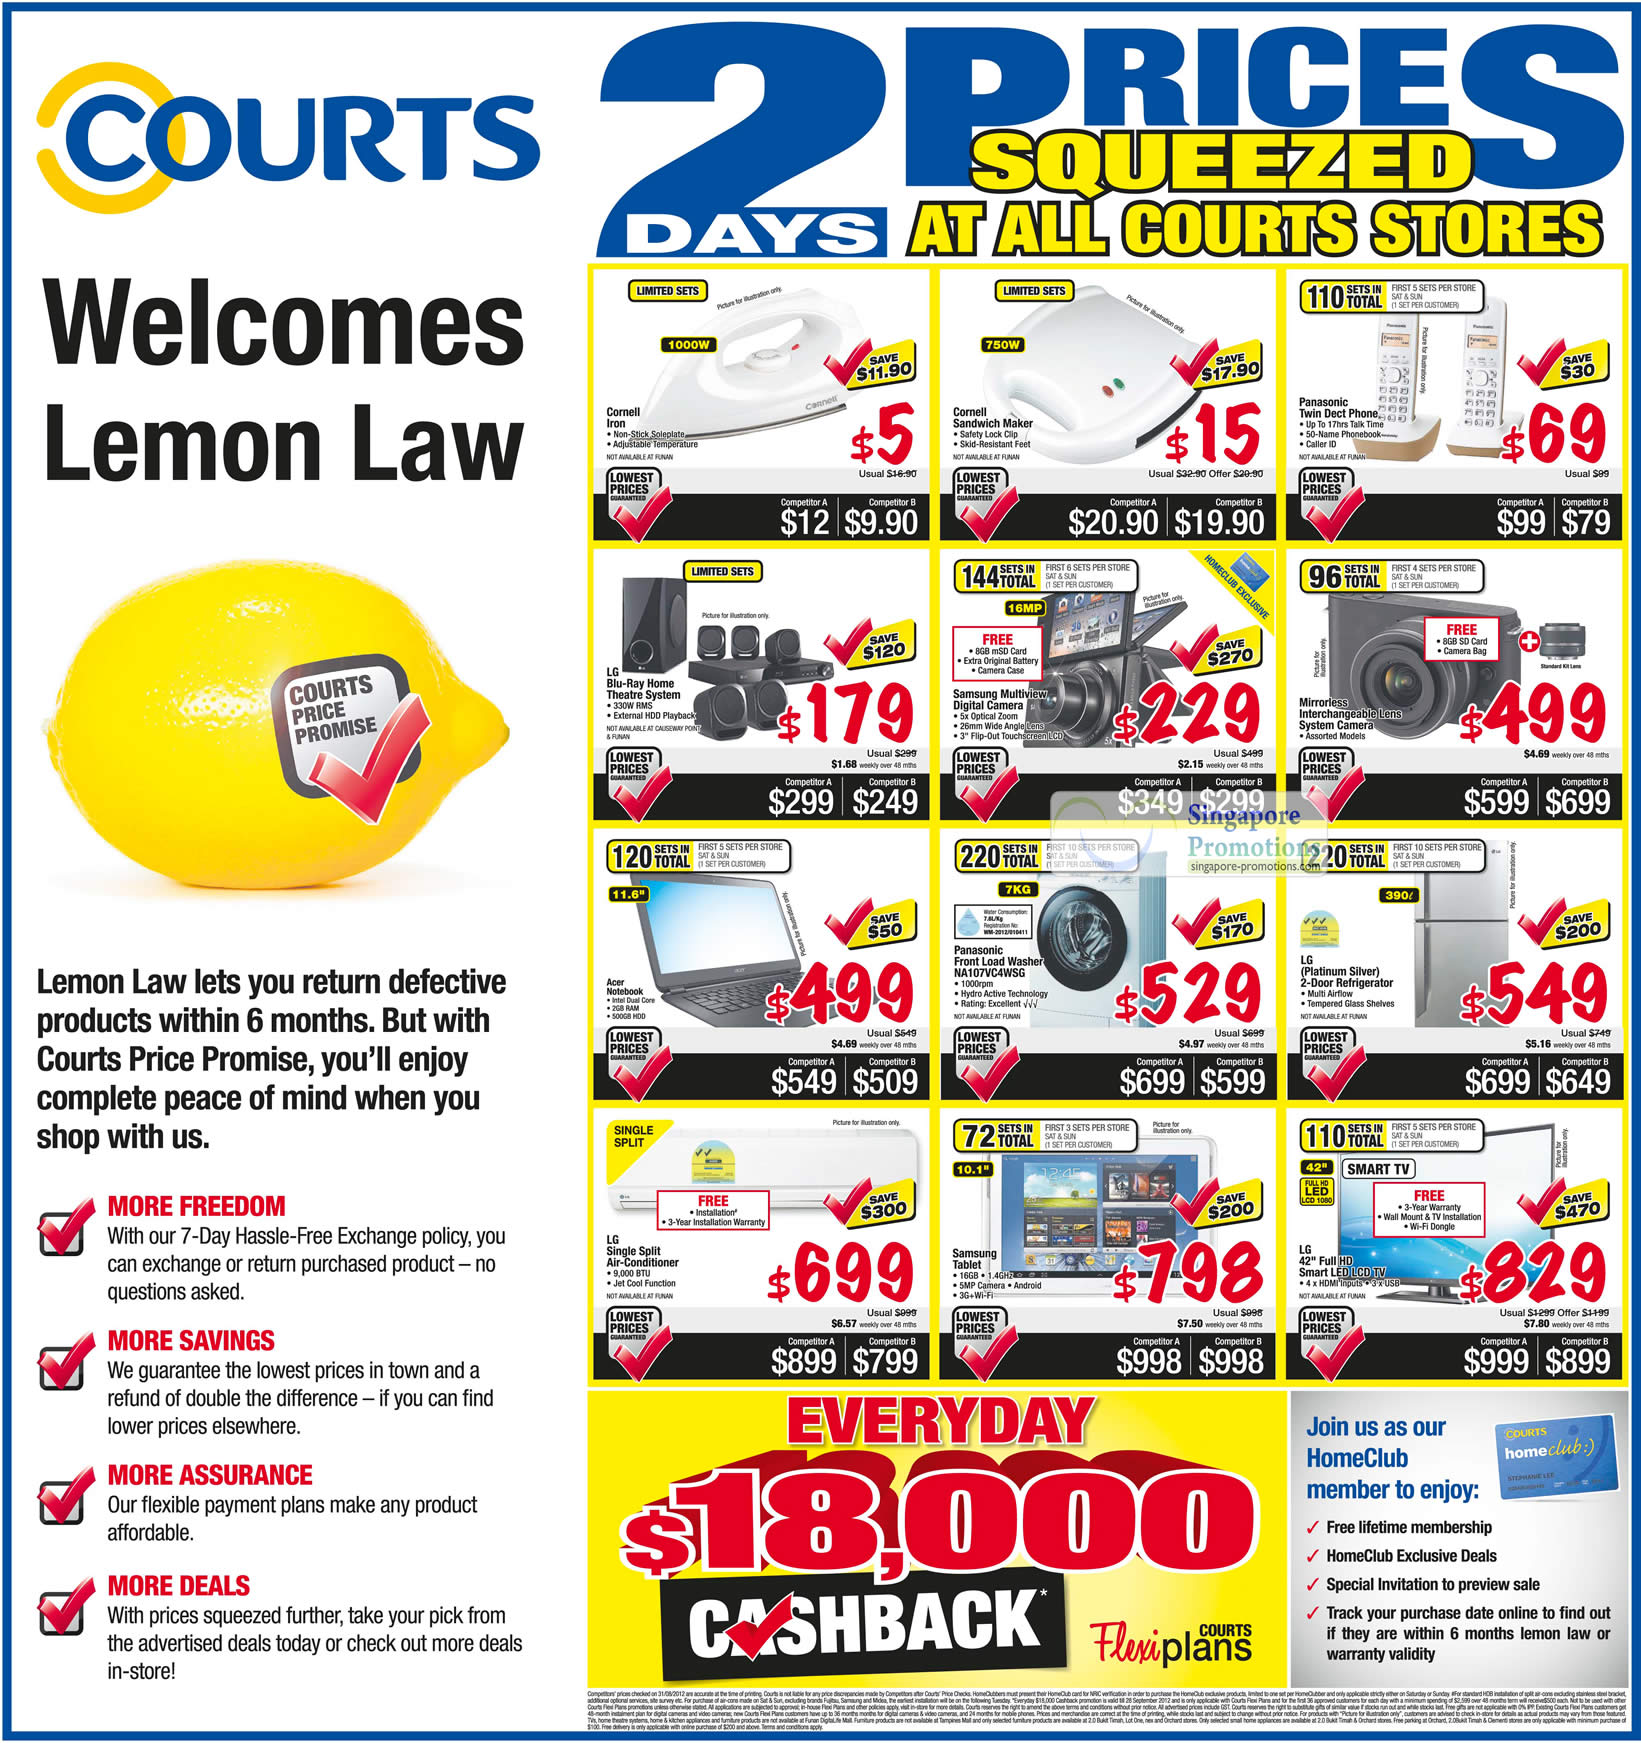 Featured image for Courts Two Days Prices Squeezed Offers Promotion 1 - 2 Sep 2012